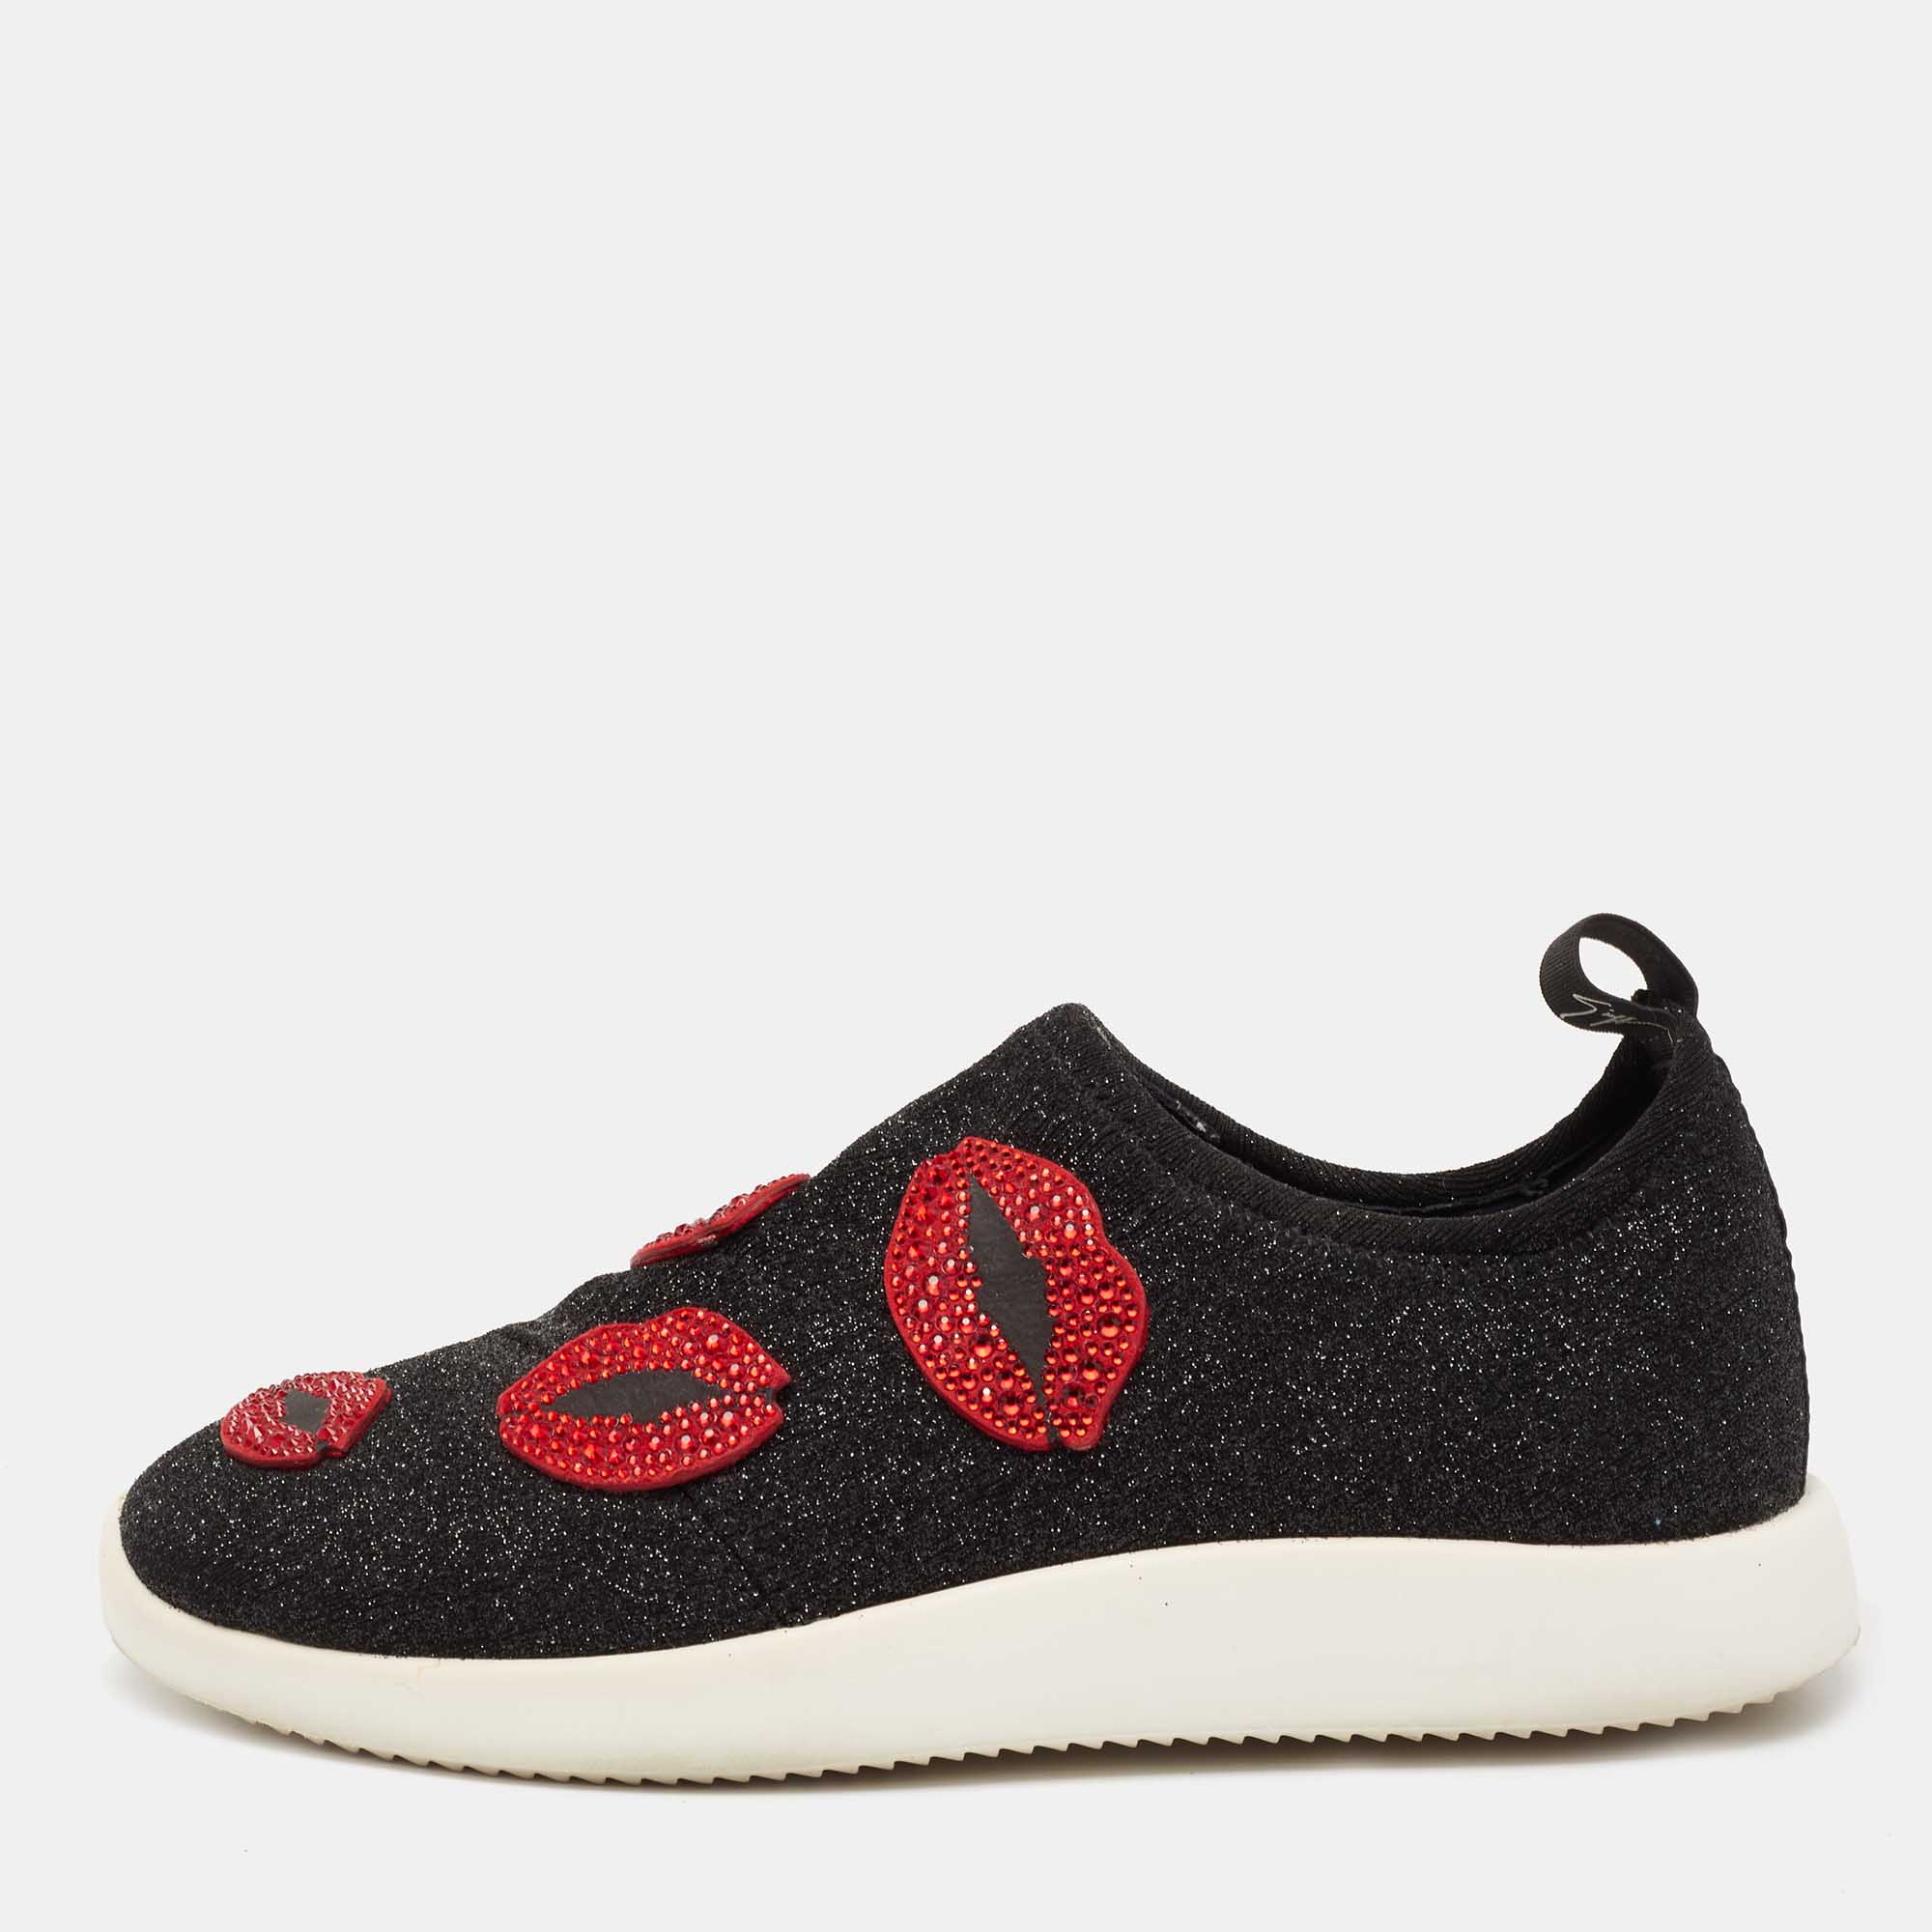 Beautifully crafted using lurex fabric these Giuseppe Zanotti slip on sneakers are sure to keep you comfortably stylish. Featuring embellished kiss motifs pull tabs and flexible rubber soles these shoes will be a great addition to your closet.